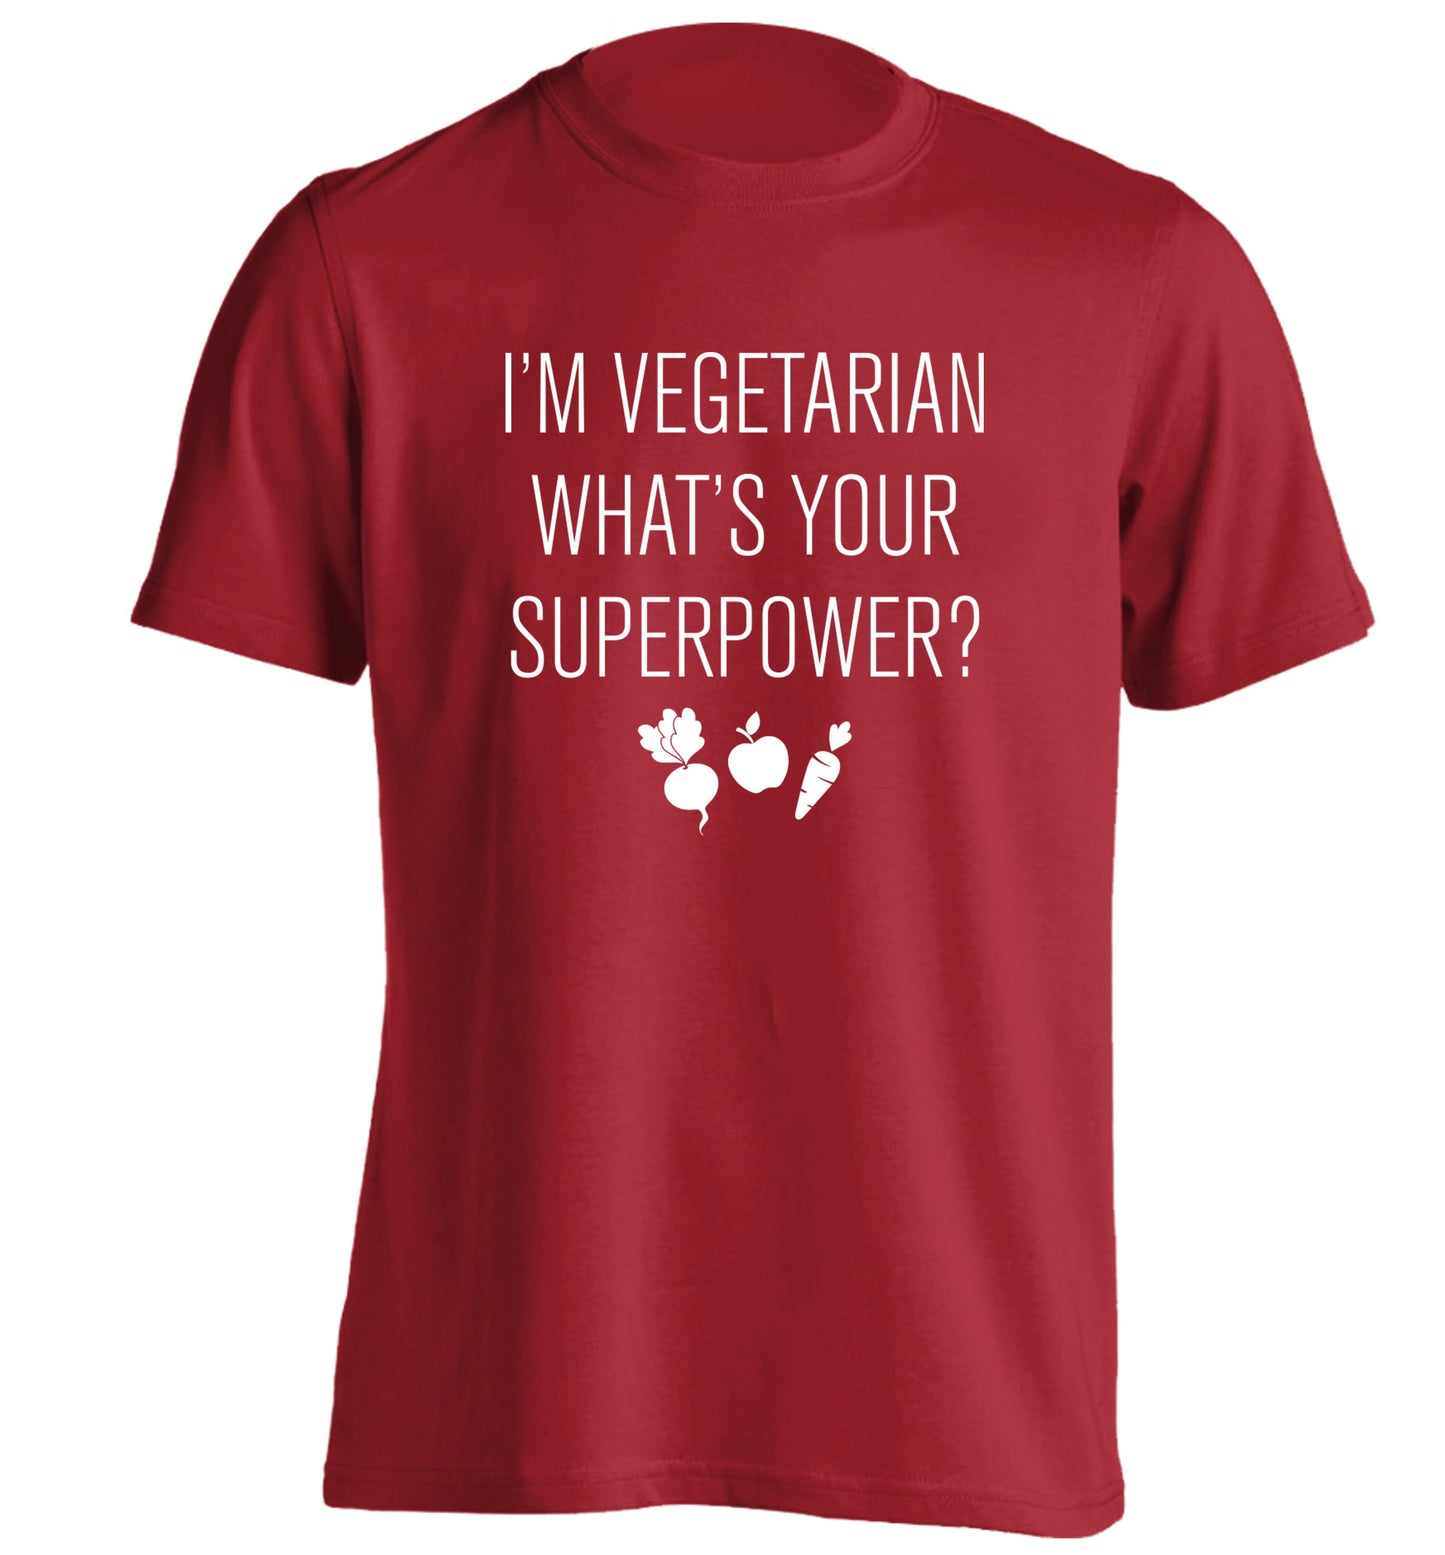 I'm vegetarian what's your superpower? adults unisex red Tshirt 2XL